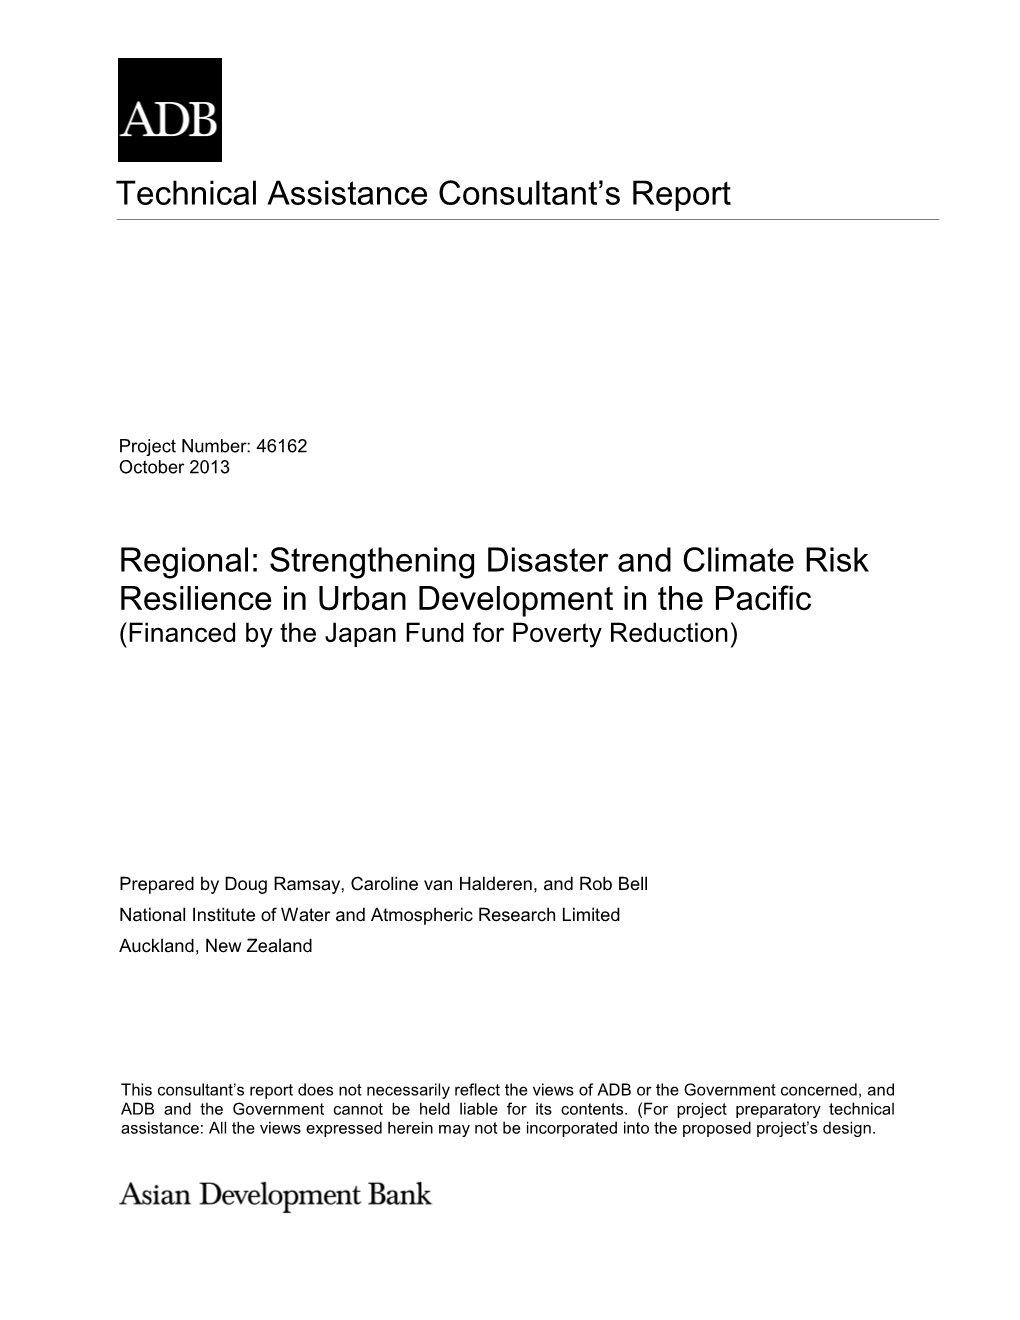 46162-001: Strengthening Disaster and Climate Risk Resilience In